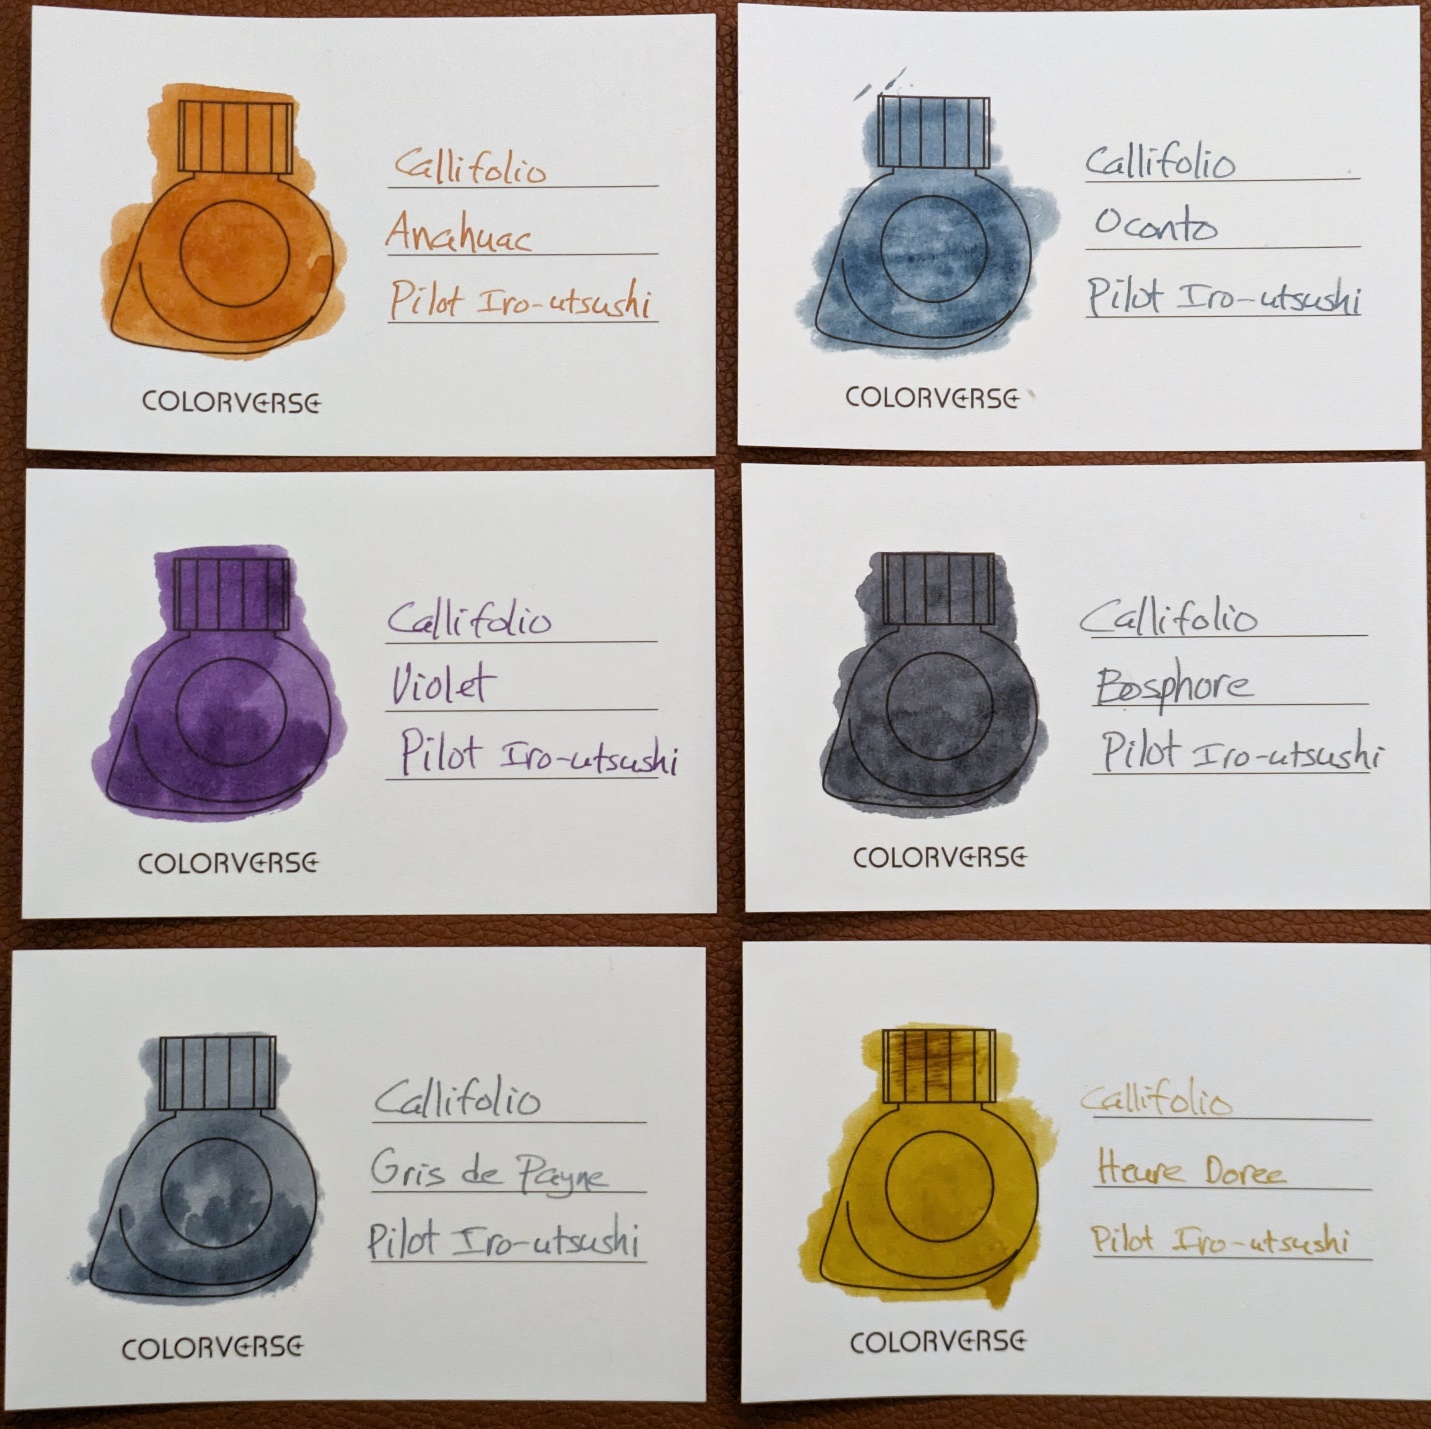 Callifolio ink swatches using a Q-tip and Pilot Iro-utsushi dip pen on Colorverse swatch cards.